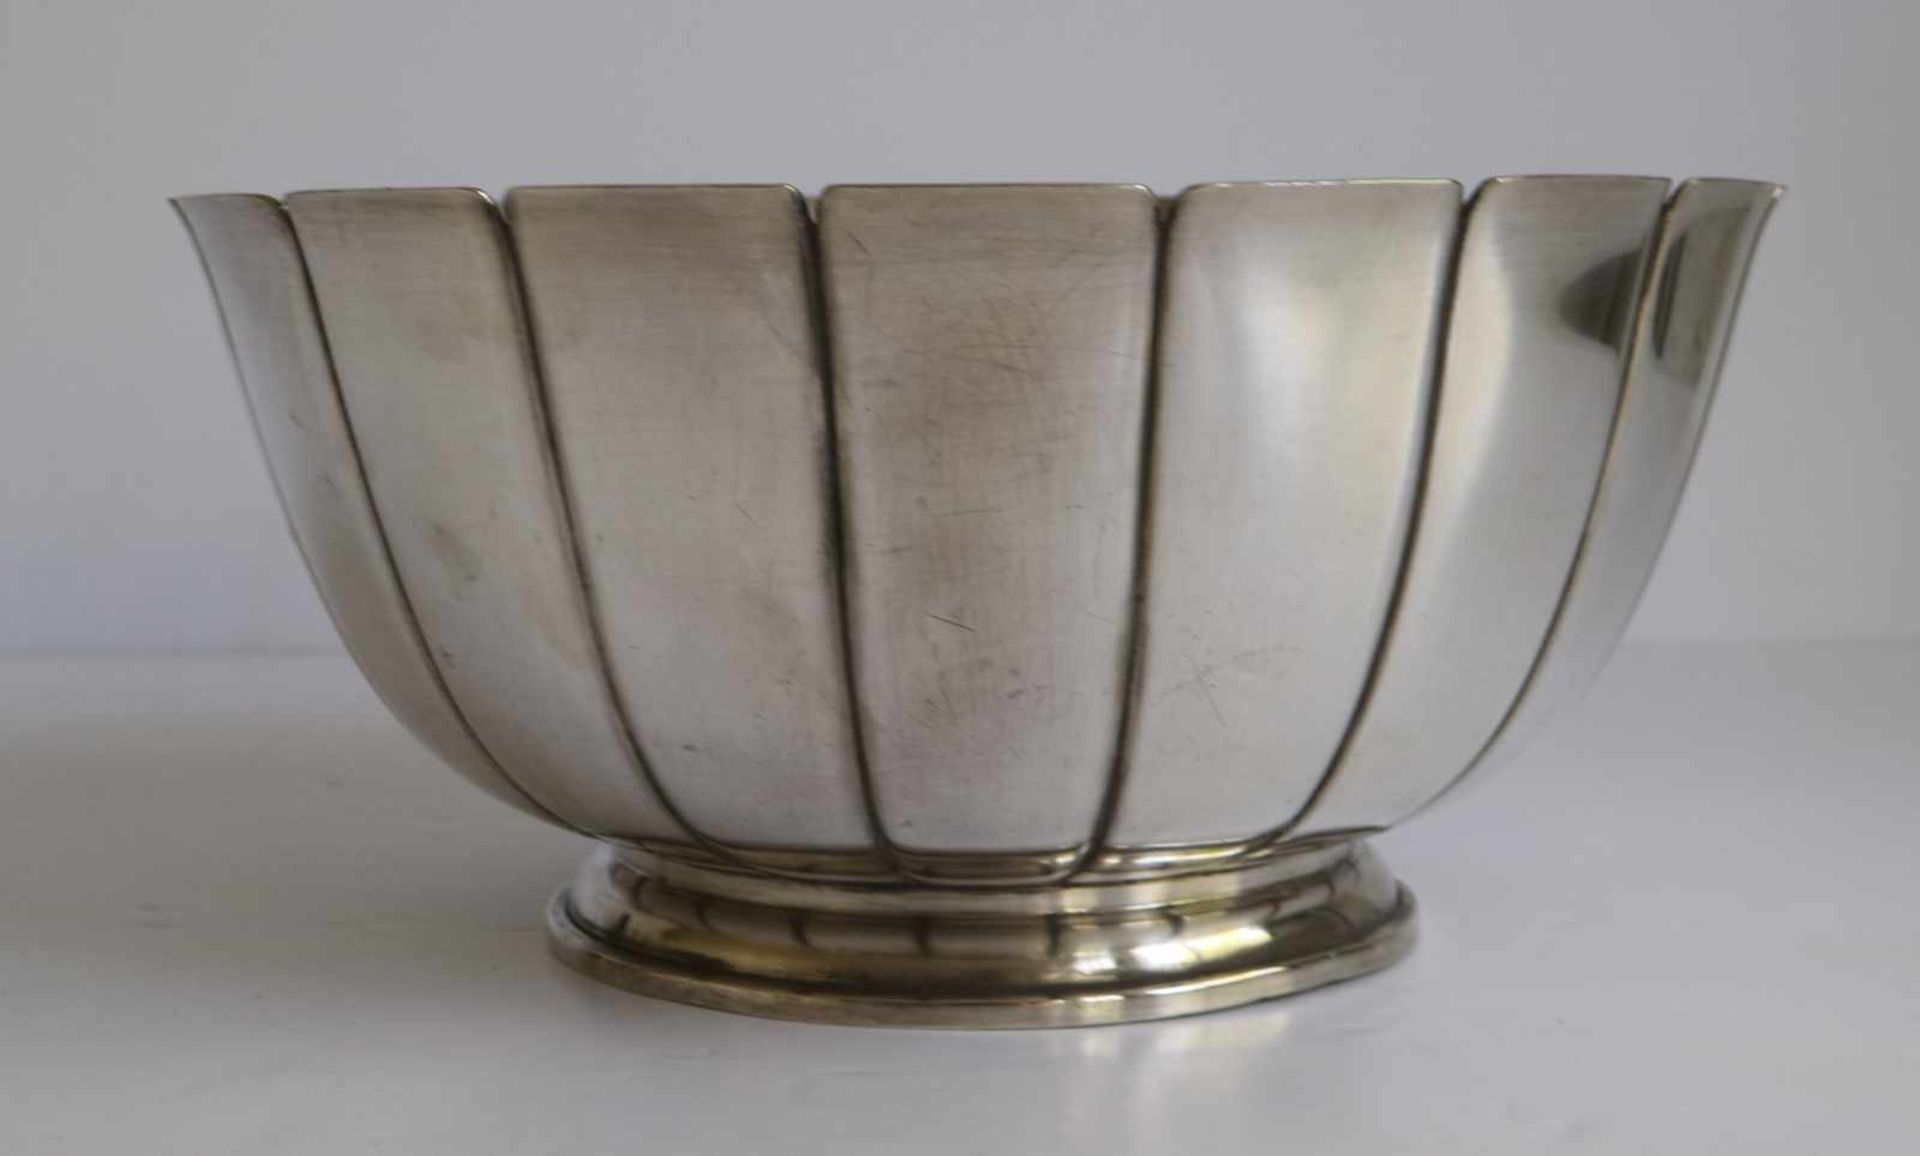 Silver fruit bowl Sterling, English, weight 1100 grams H 12 dia 25,5 cm - Image 3 of 4